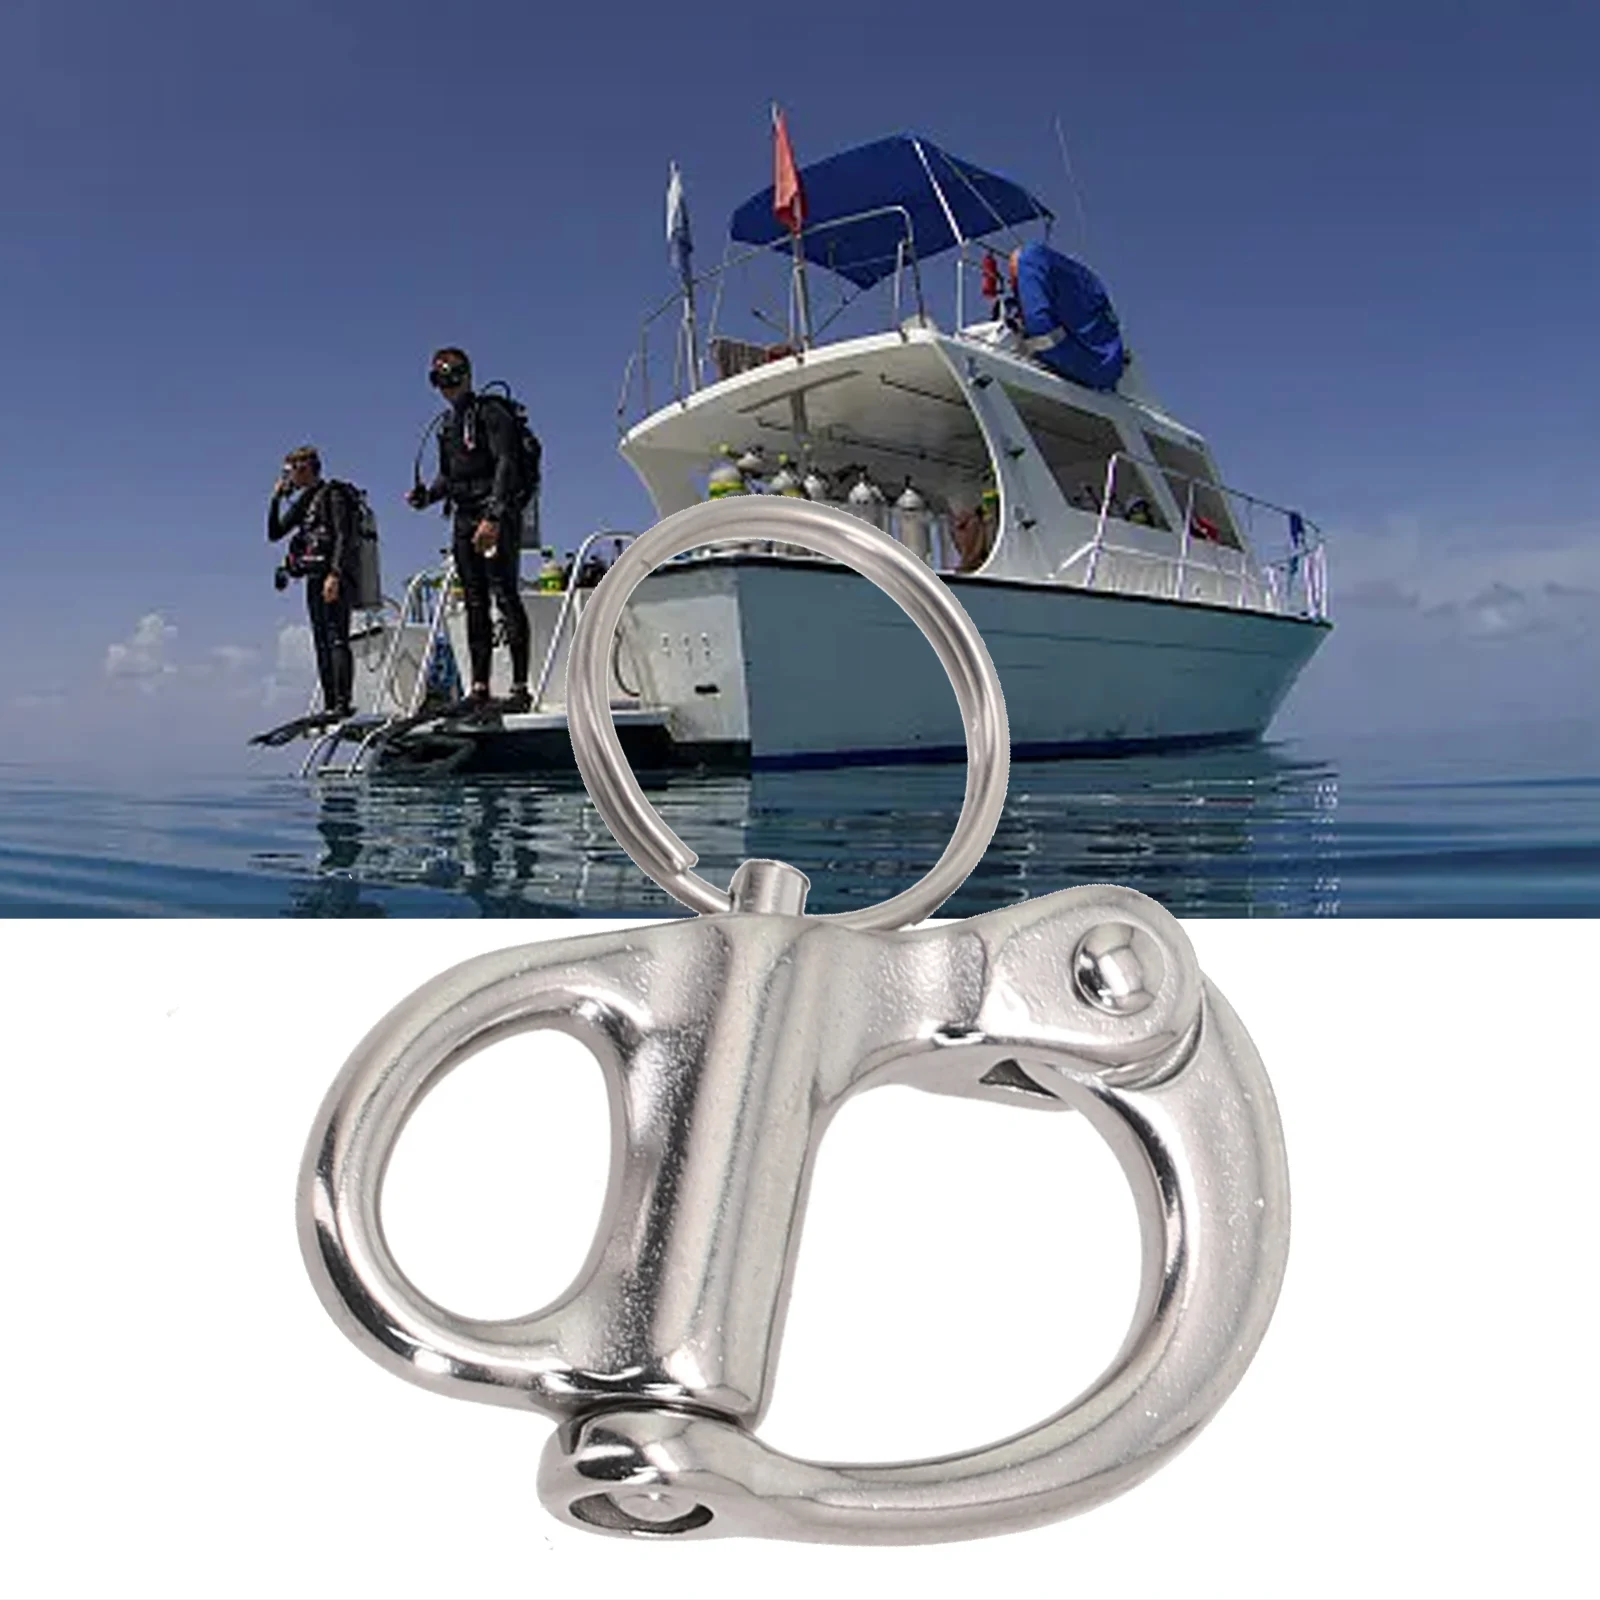 1PCS 35/52/69/96MM Quick Release Boat Anchor Chain Eye Shackle Swivel Hook Snap Marine Tools 316/304 Stainless Steel Accessory stainless steel swivel shackle quick release boat anchor chain eye shackle swivel snap hook for marine architectural 10pcs 87mm